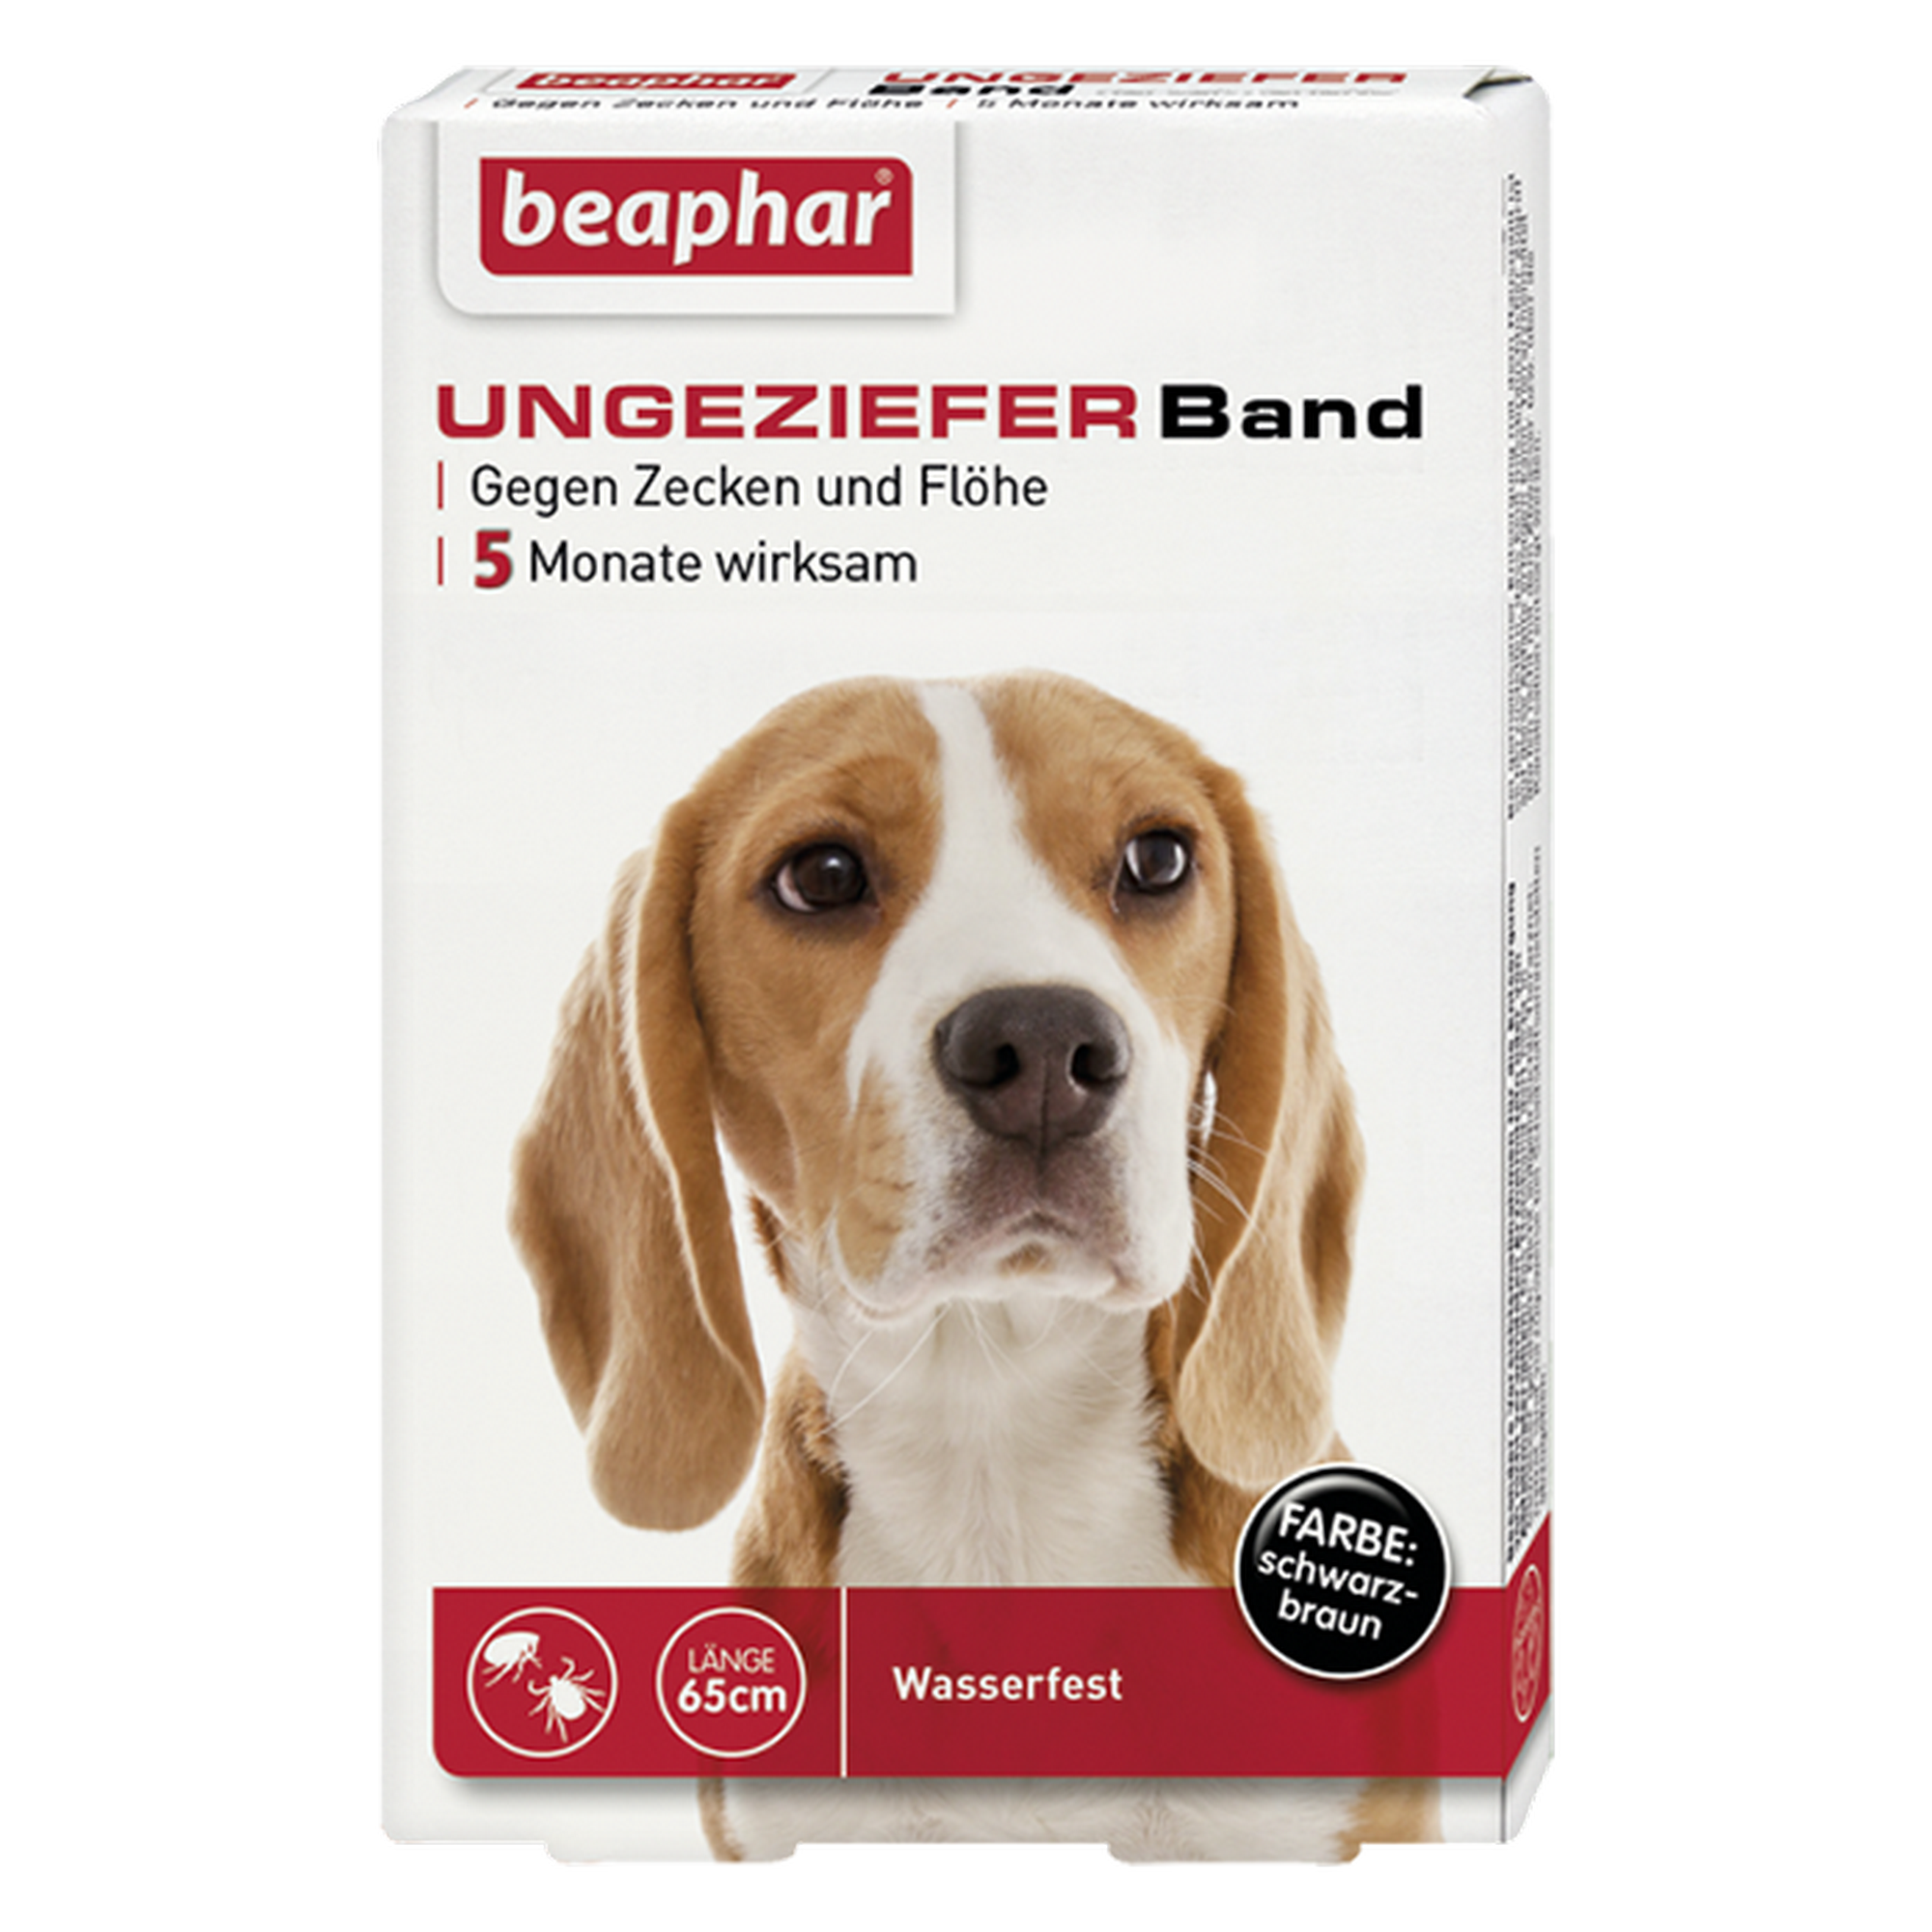 Ungezieferband für Hunde 65 cm + product picture